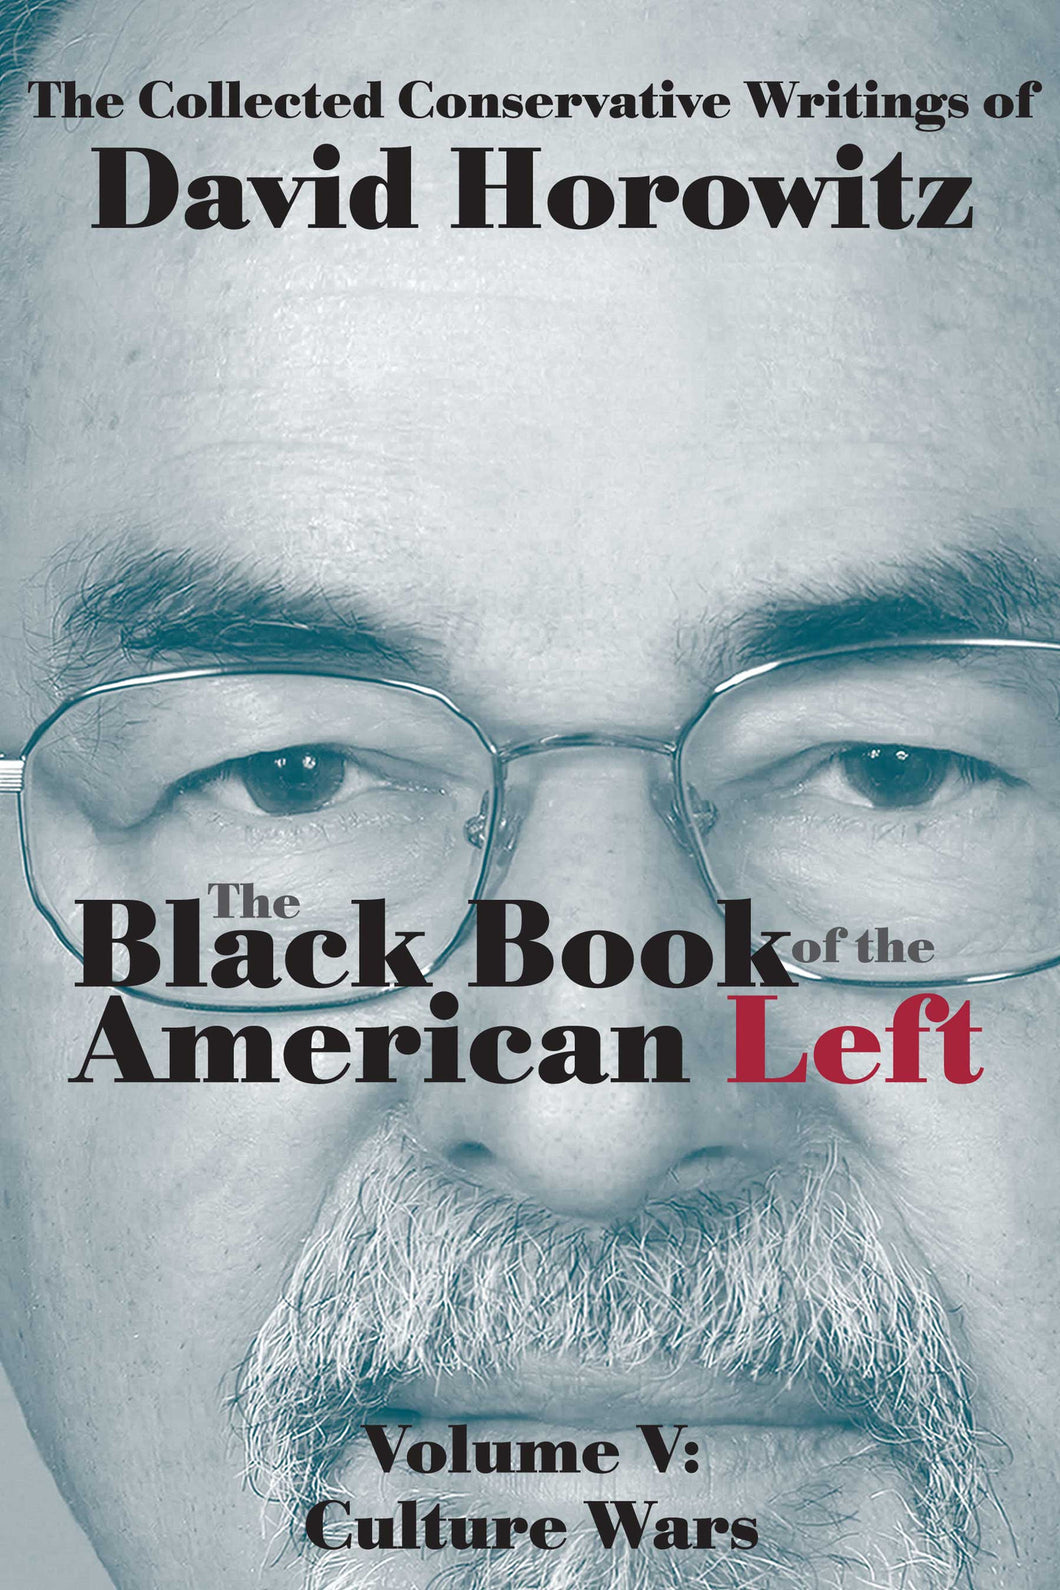 The Black Book of the American Left Volume V: Culture Wars